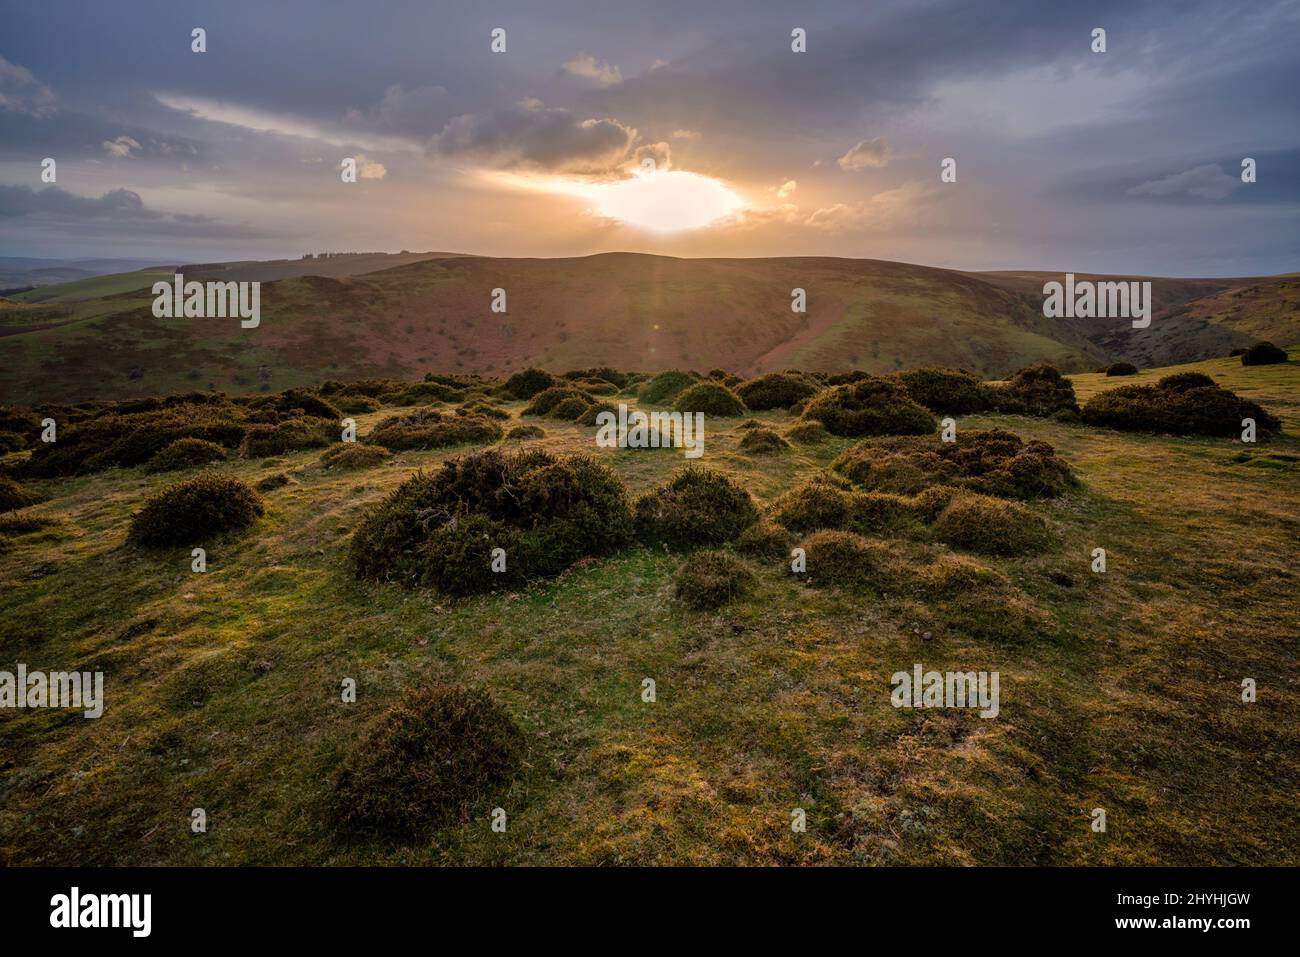 Sunshine breaking through stormy clouds on Callow Hill in the Shropshire Hills, England Stock Photo